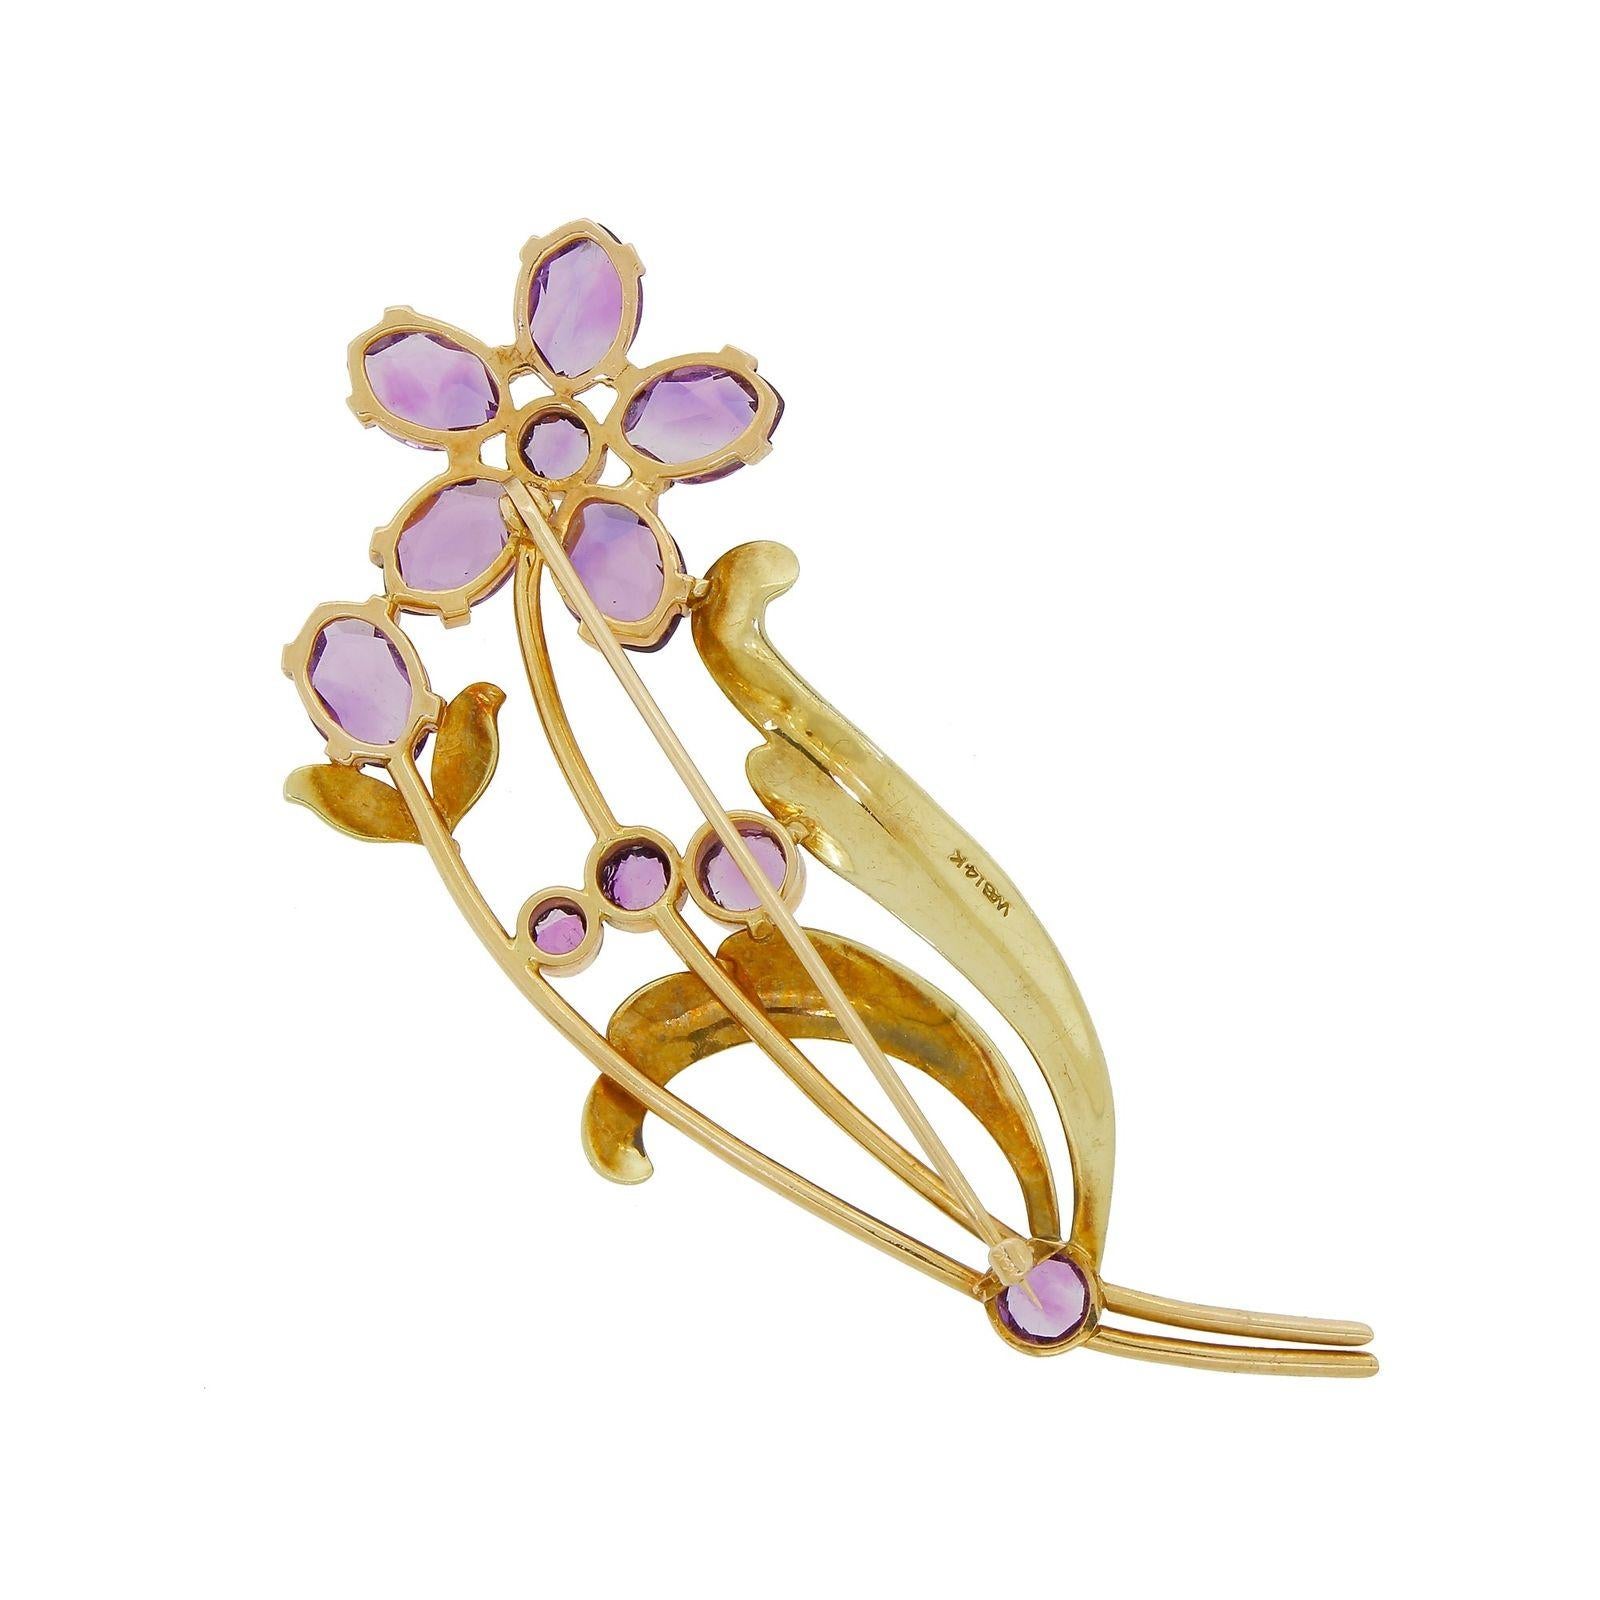  Beautiful early Wordley Allsopp & Bliss floral spray pin made out a 14k yellow gold with perfectly matched glittering Amethysts. 
This is one of their larger pieces that measures just over 3 inches long and it is quite heavy too - over 15